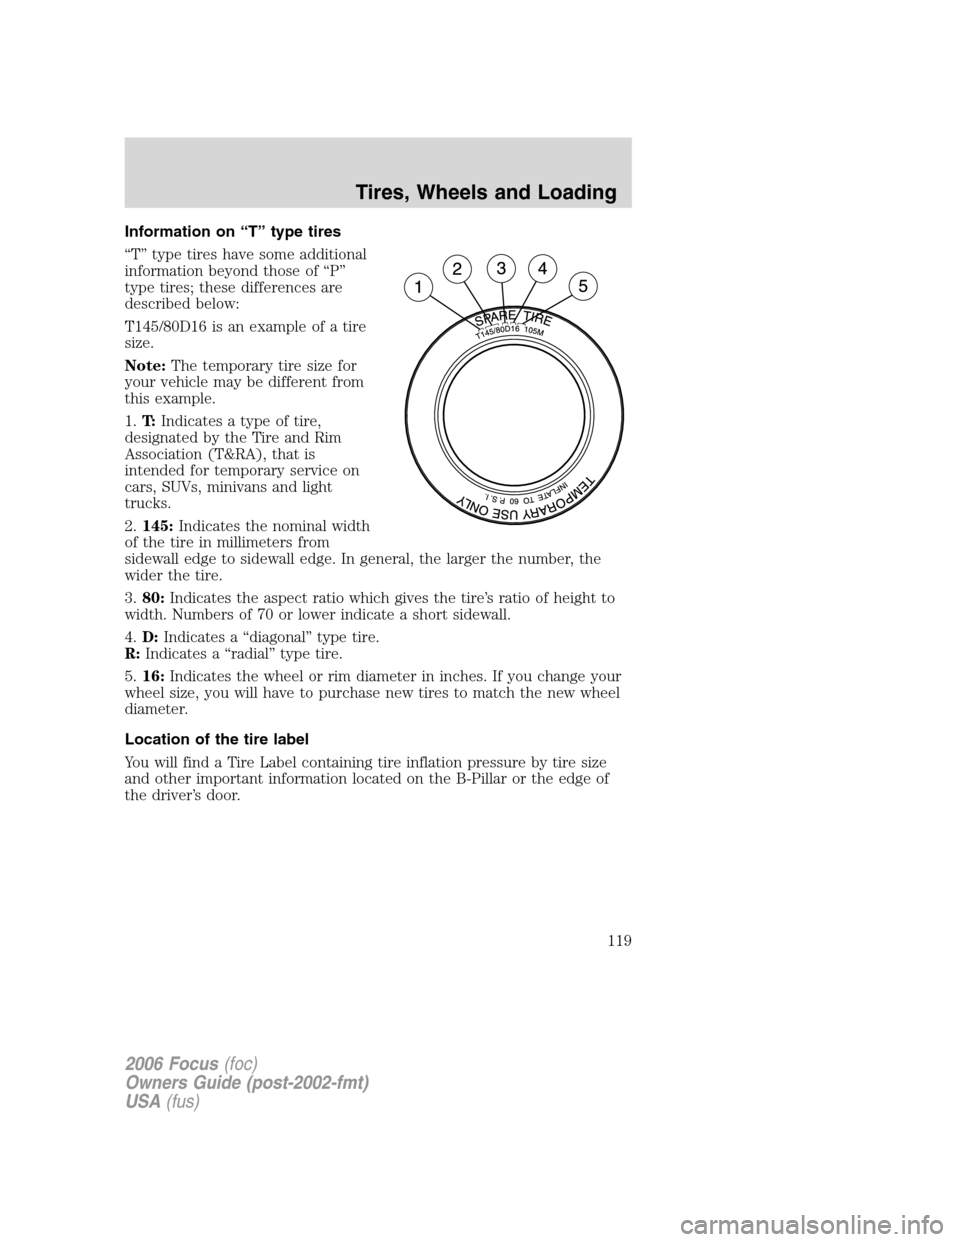 FORD FOCUS 2006 2.G Owners Manual Information on “T” type tires
“T” type tires have some additional
information beyond those of “P”
type tires; these differences are
described below:
T145/80D16 is an example of a tire
size